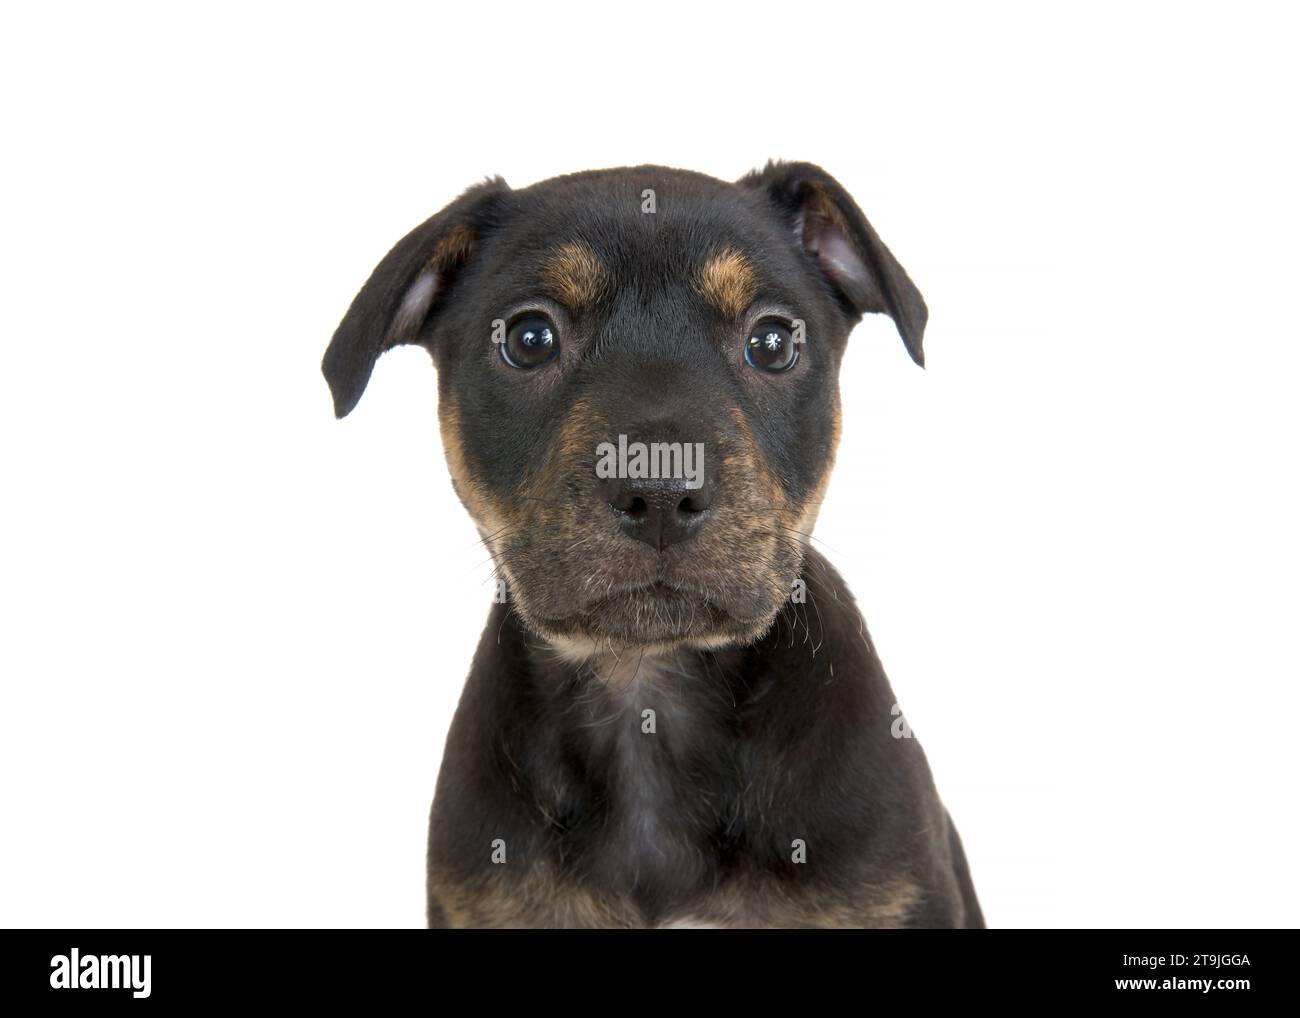 Close up portrait of a black and brown brindle American Staffordshire Terrier puppy, isolated on white. Looking directly at viewer. Stock Photo